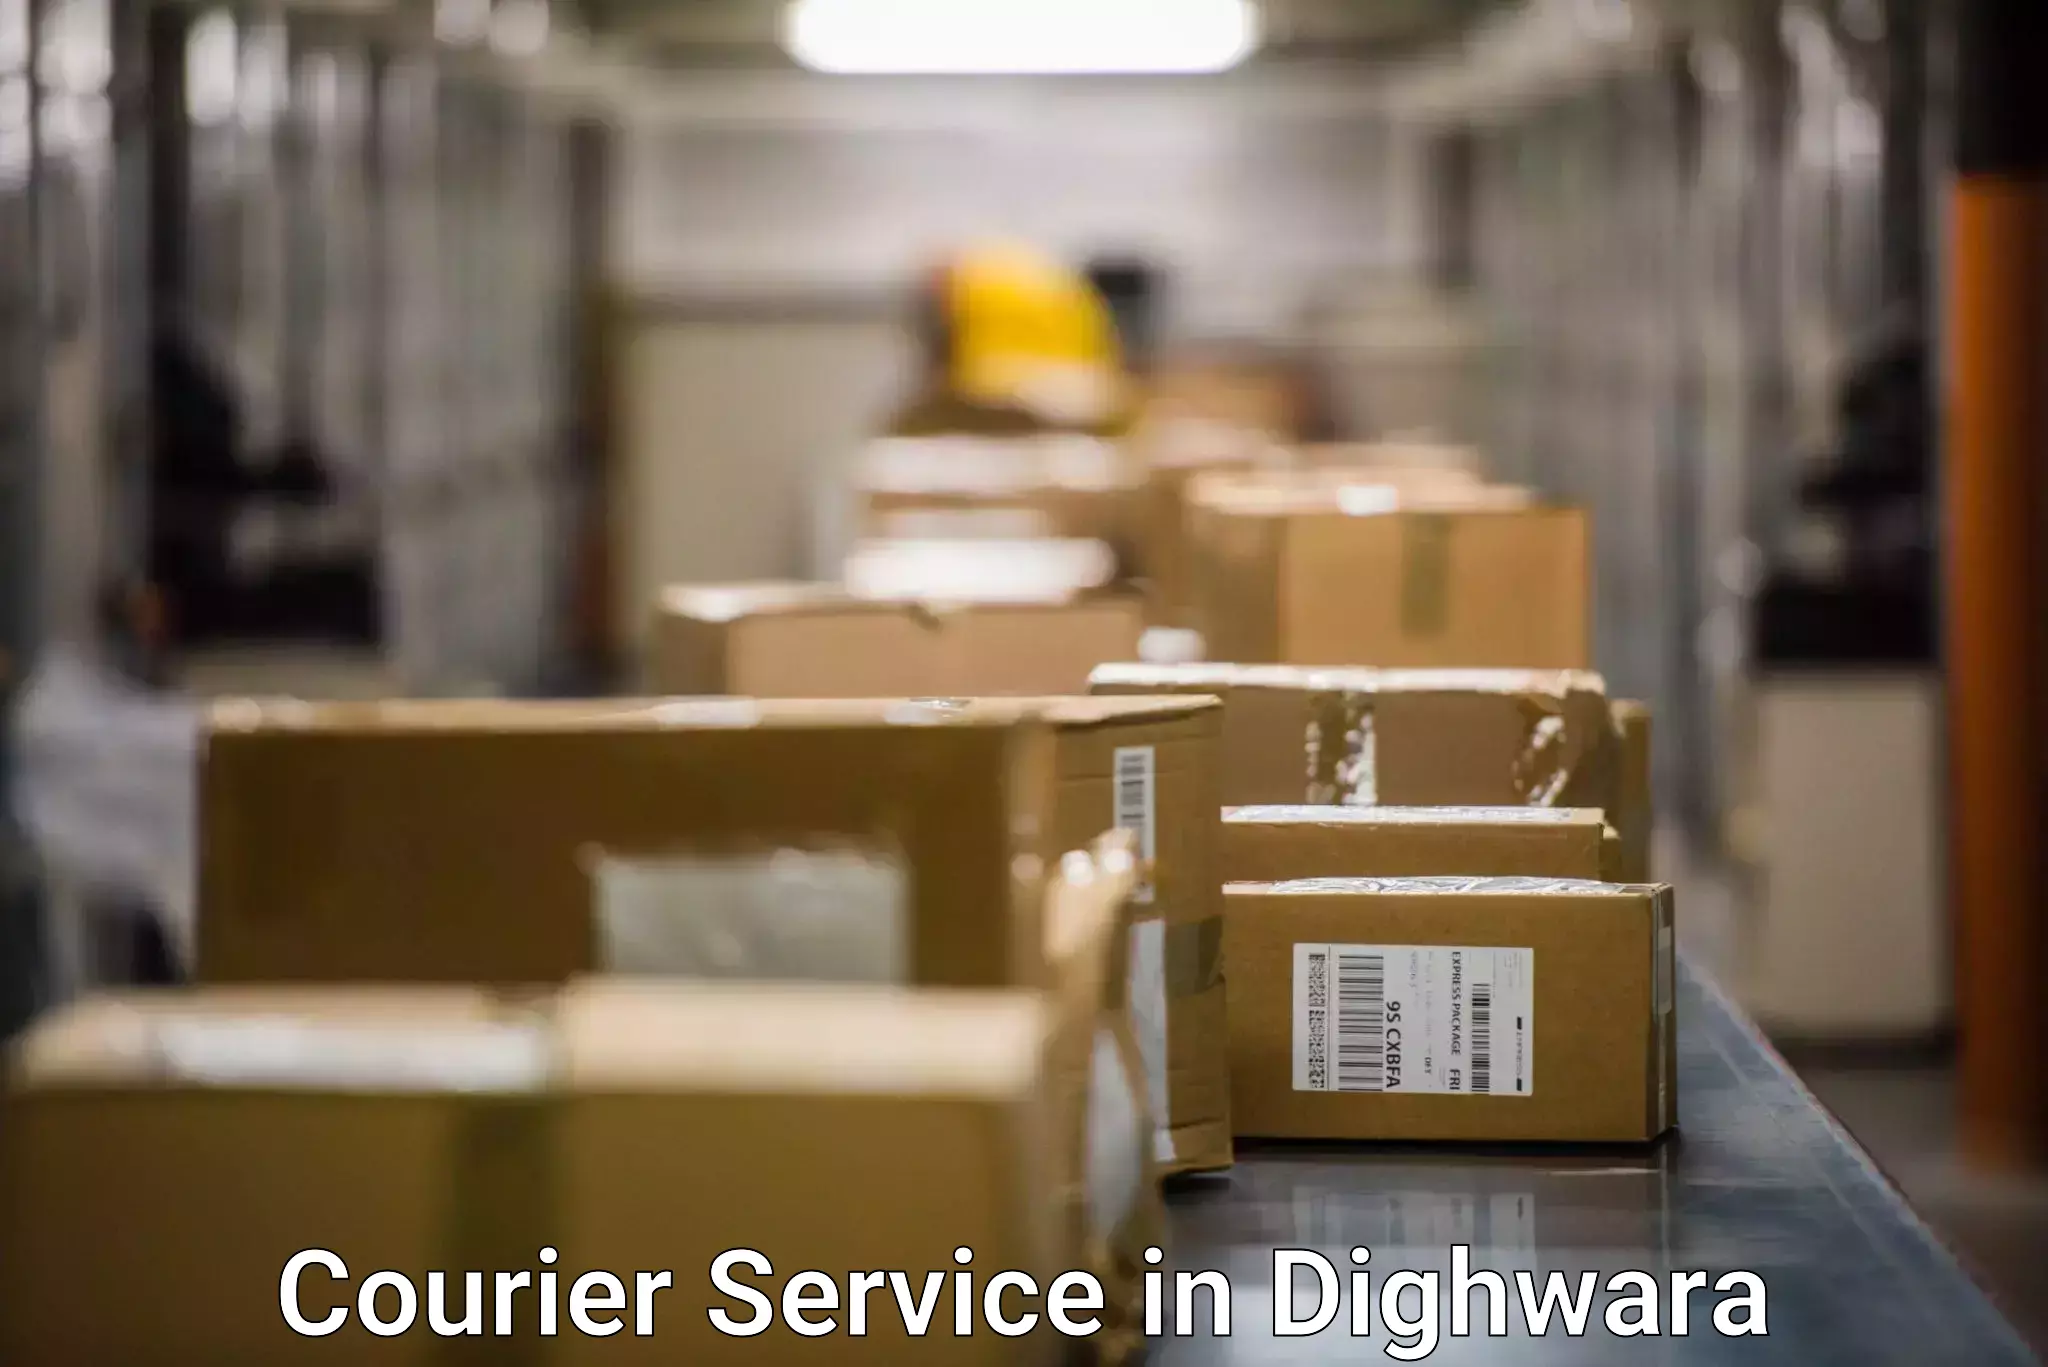 Courier service innovation in Dighwara